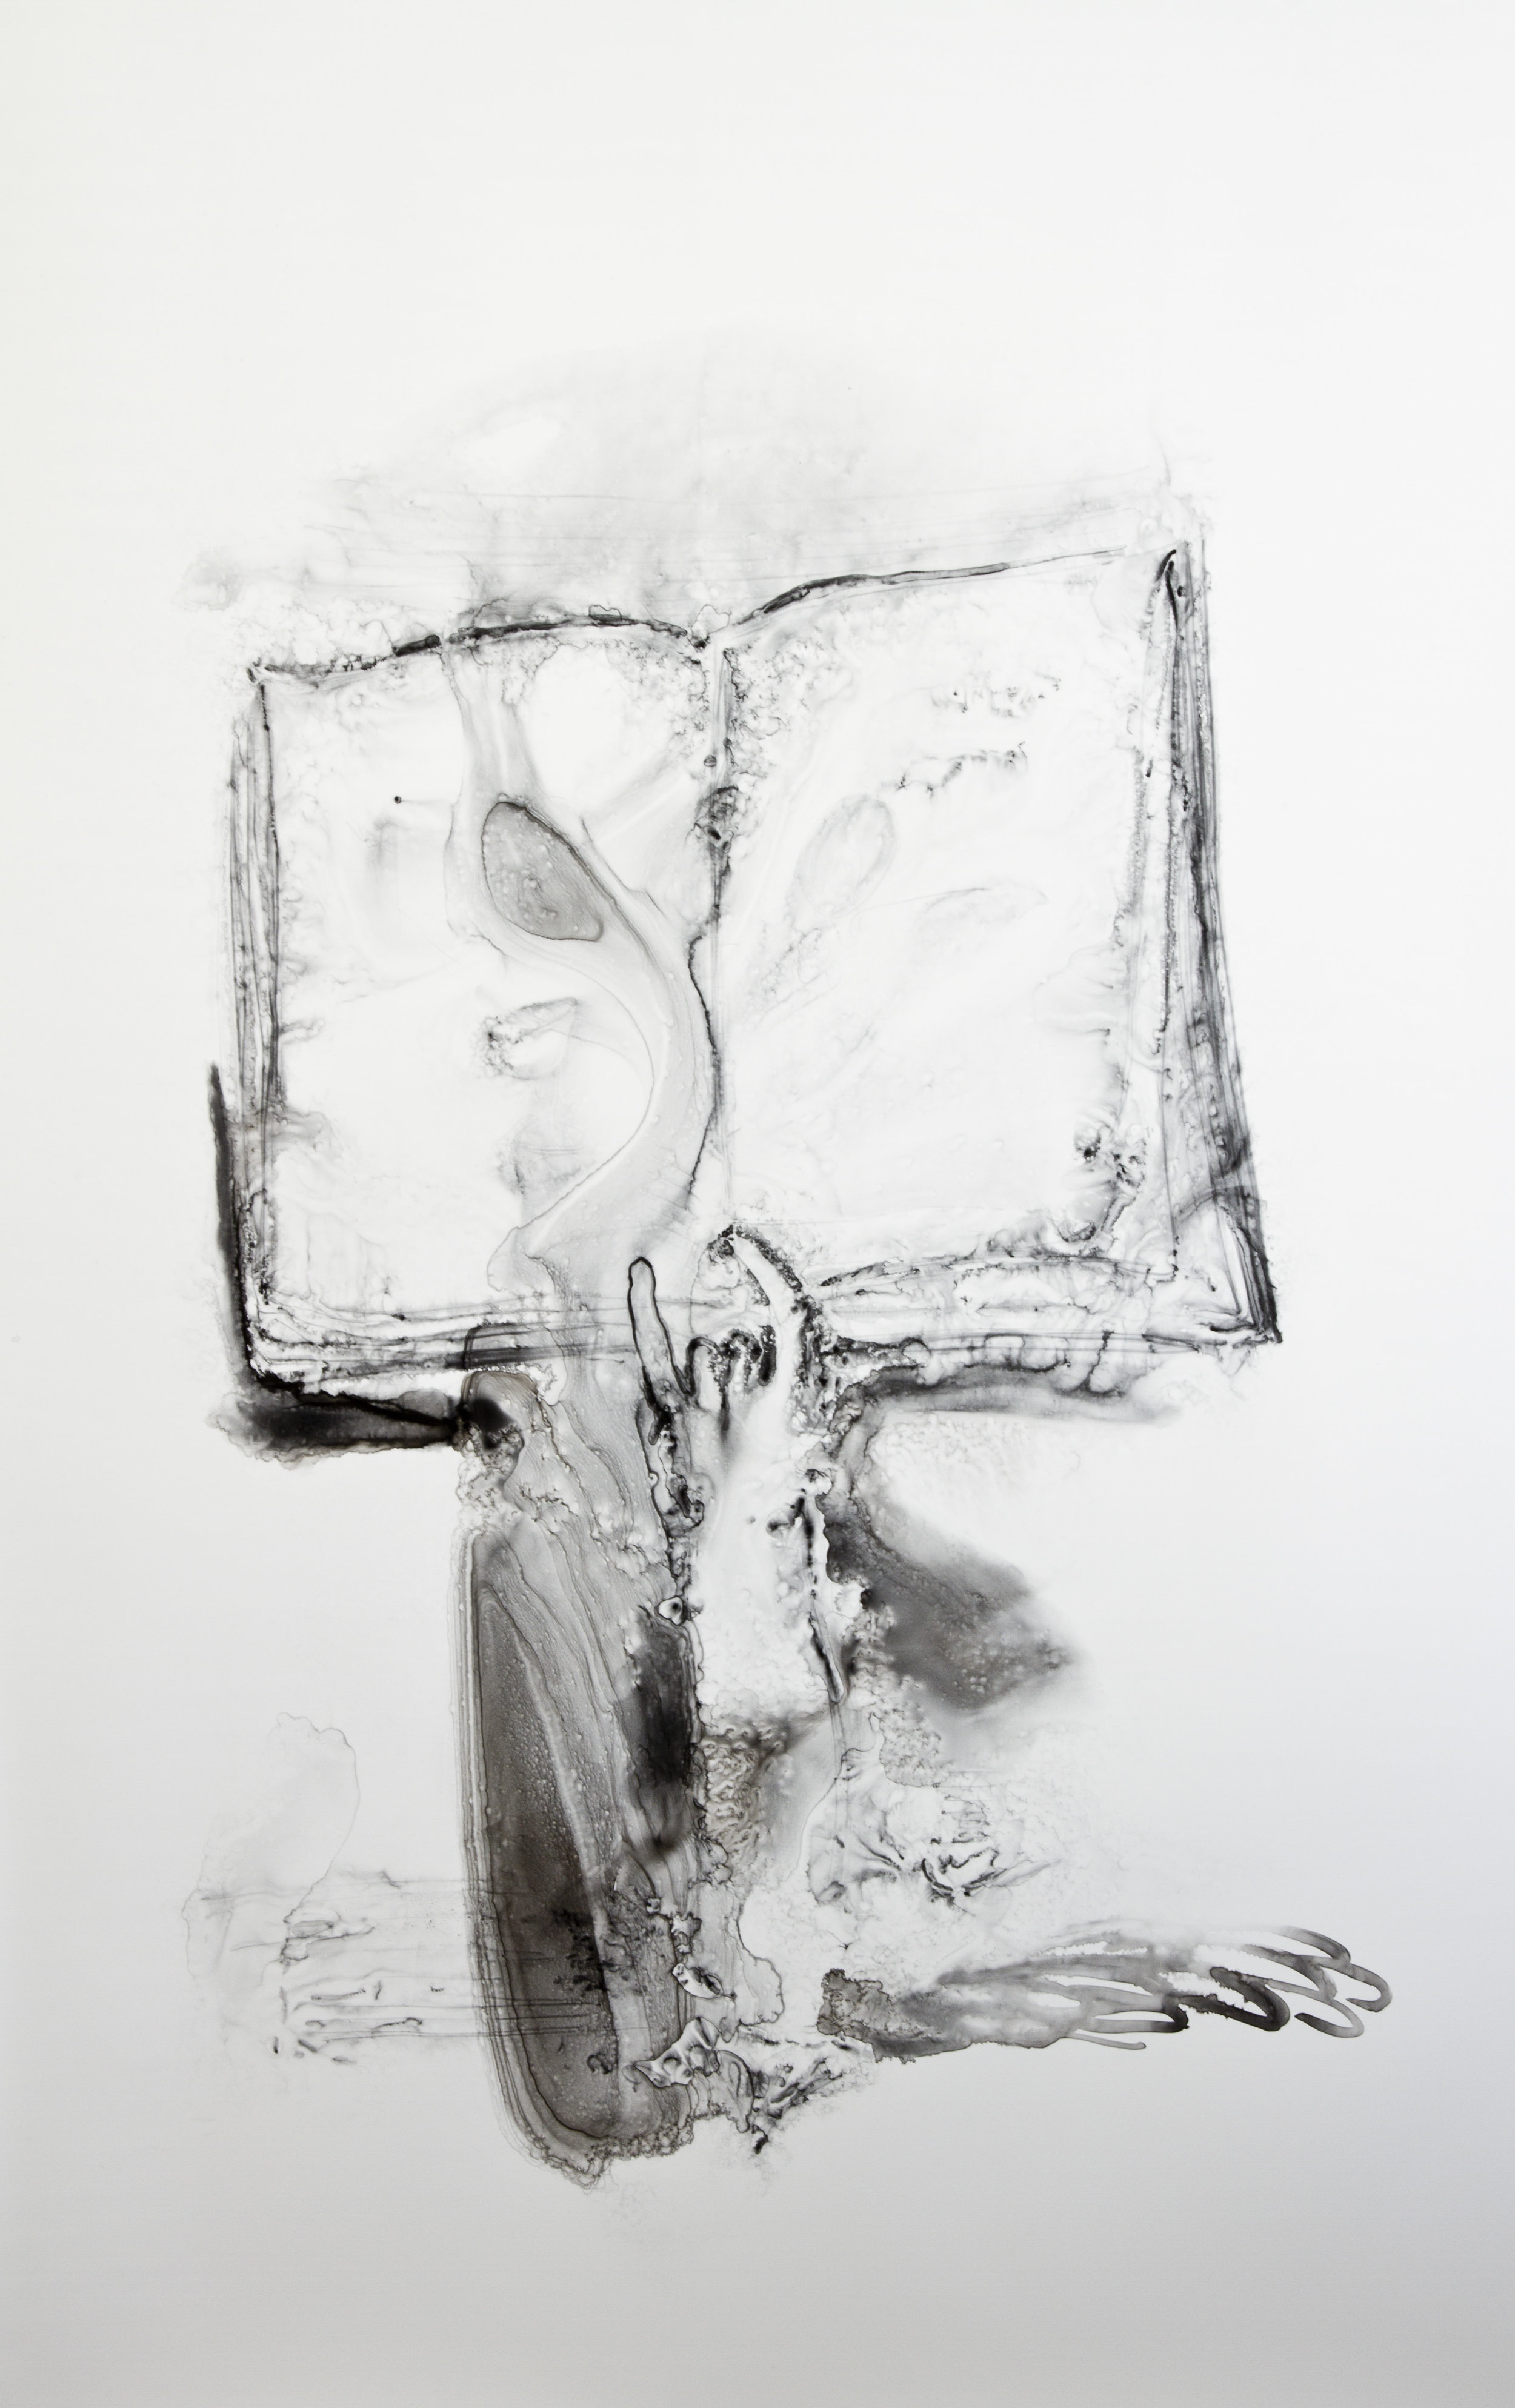 Signing the Book, 2016, watercolor on polypropylene, 60x40 inches